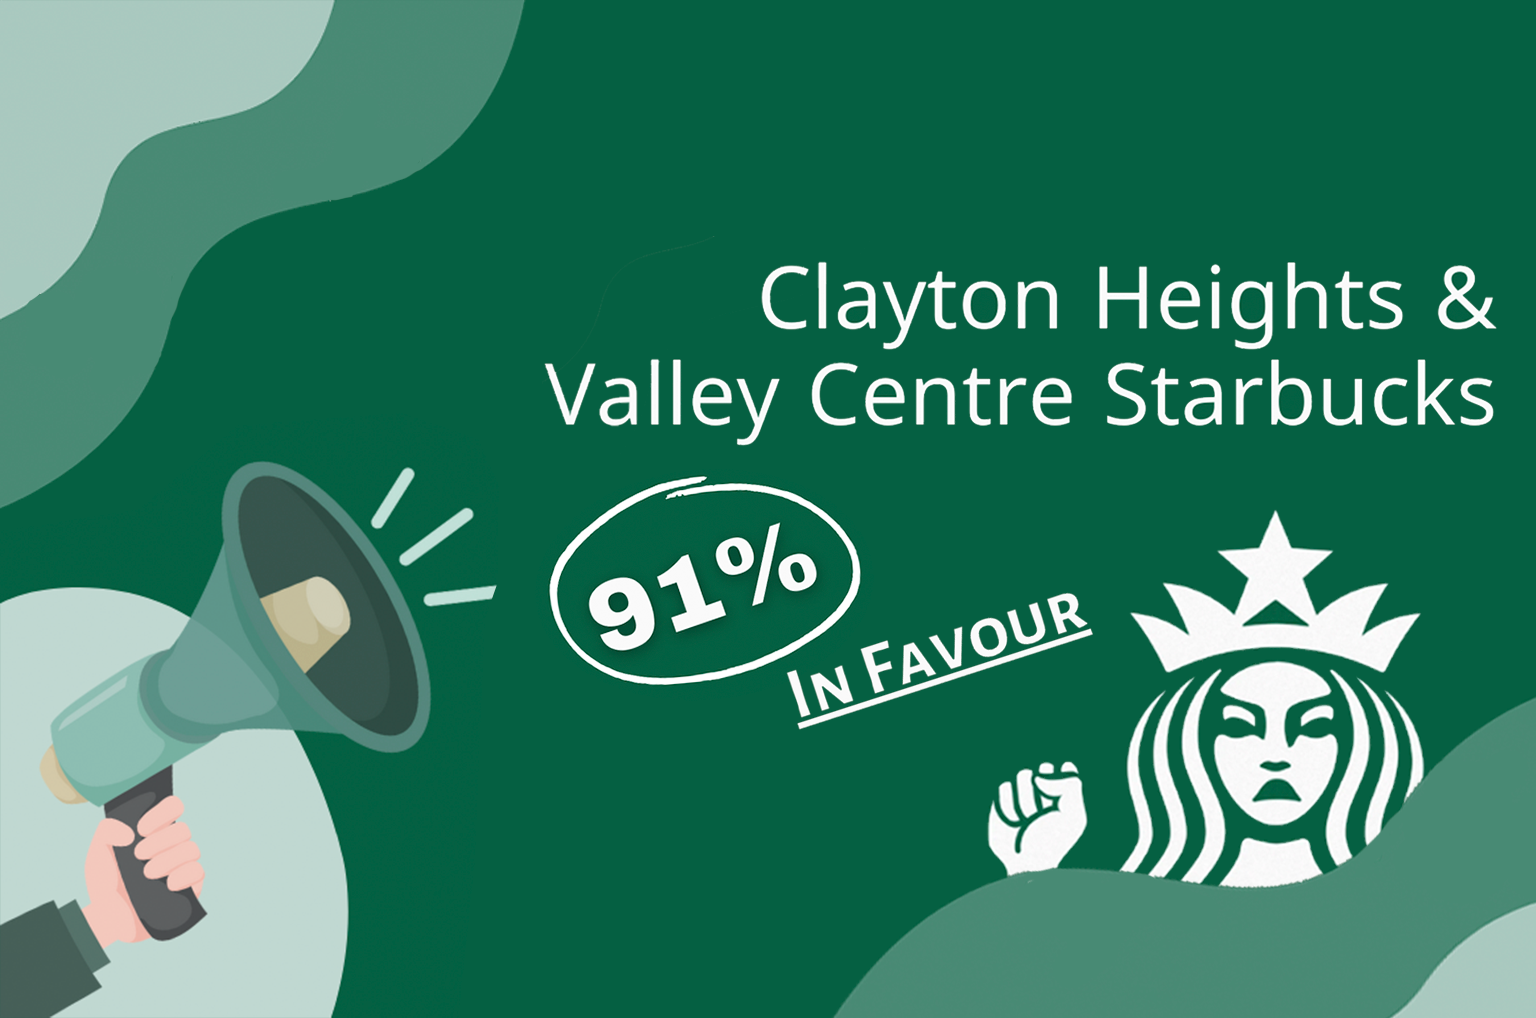 Clayton Heights and Valley Centre Starbucks 91% In Favour of strike.